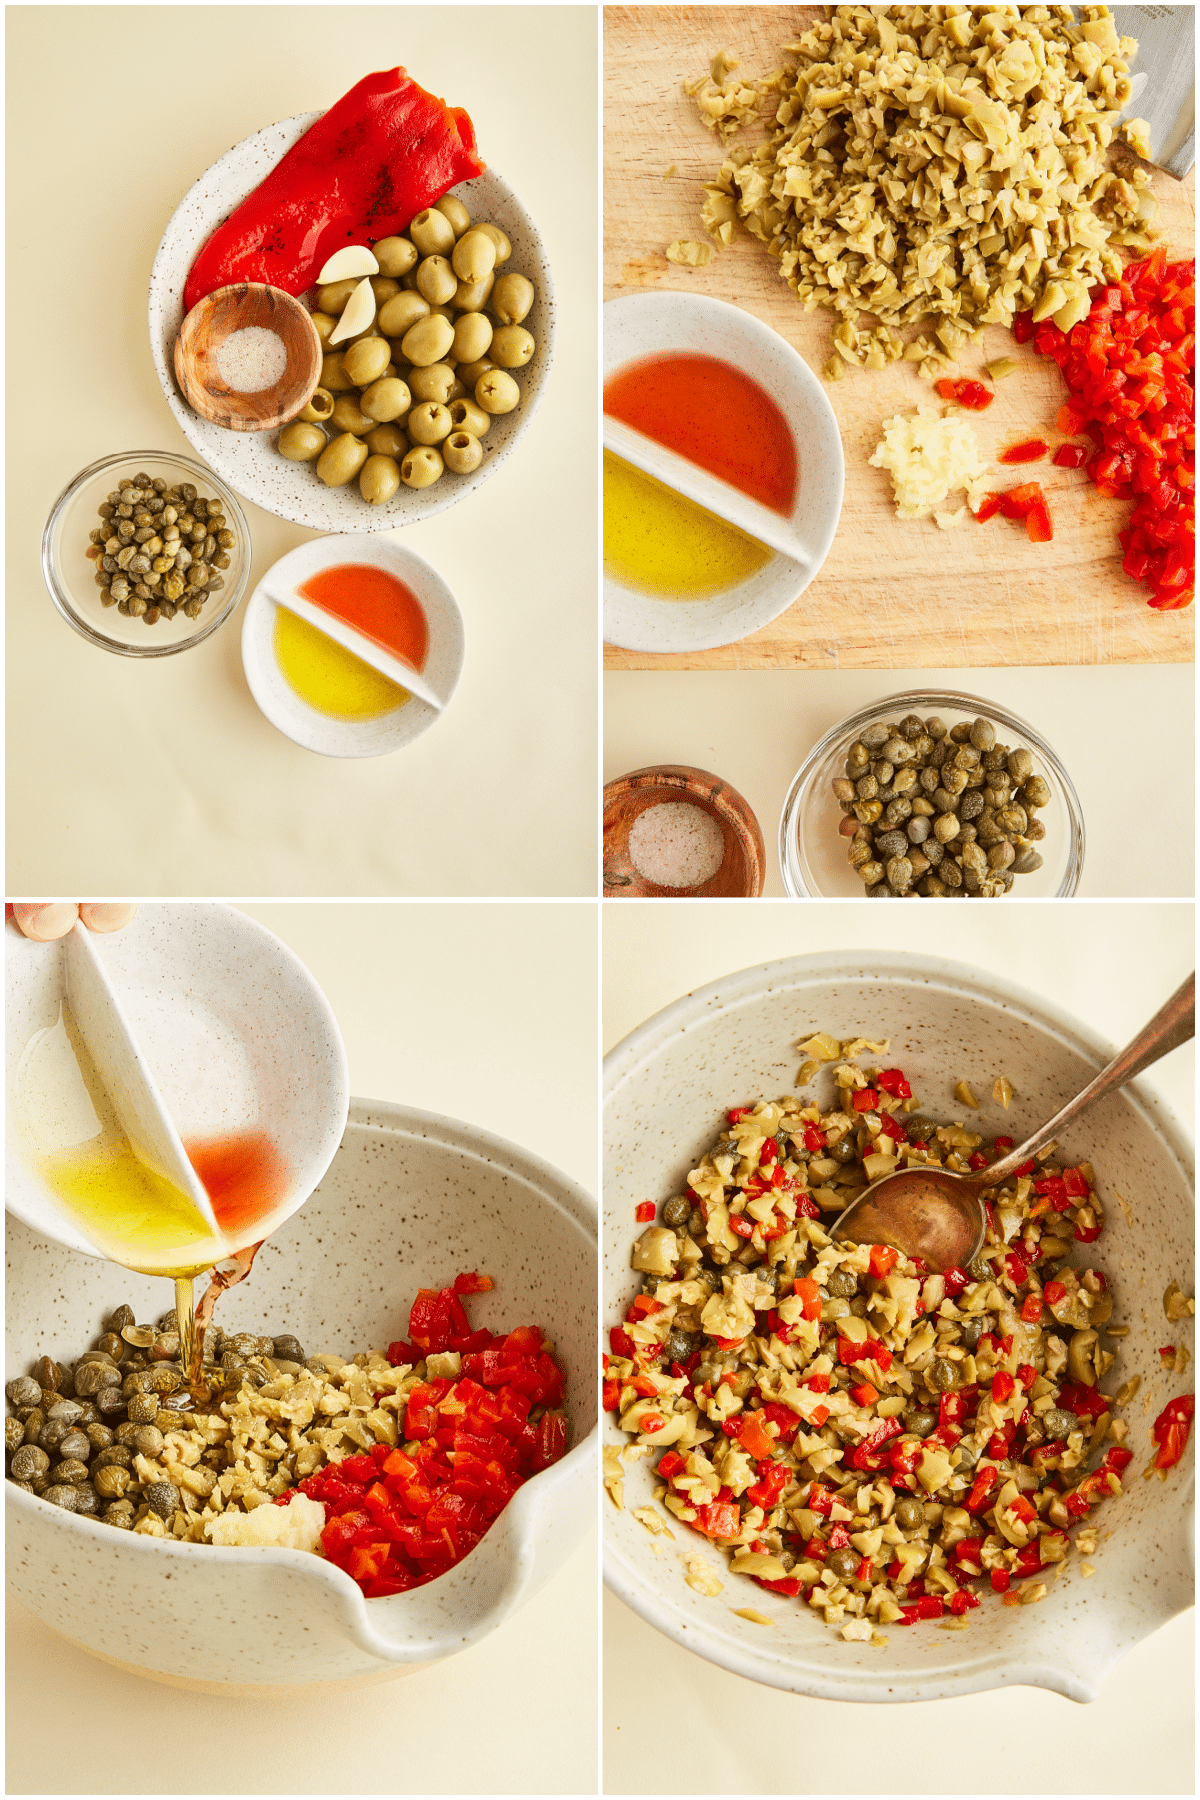 Four image collage shows how to make tapenade: chop the ingredients in uniform pieces, add to a bowl with olive oil and vinegar, stir to combine.